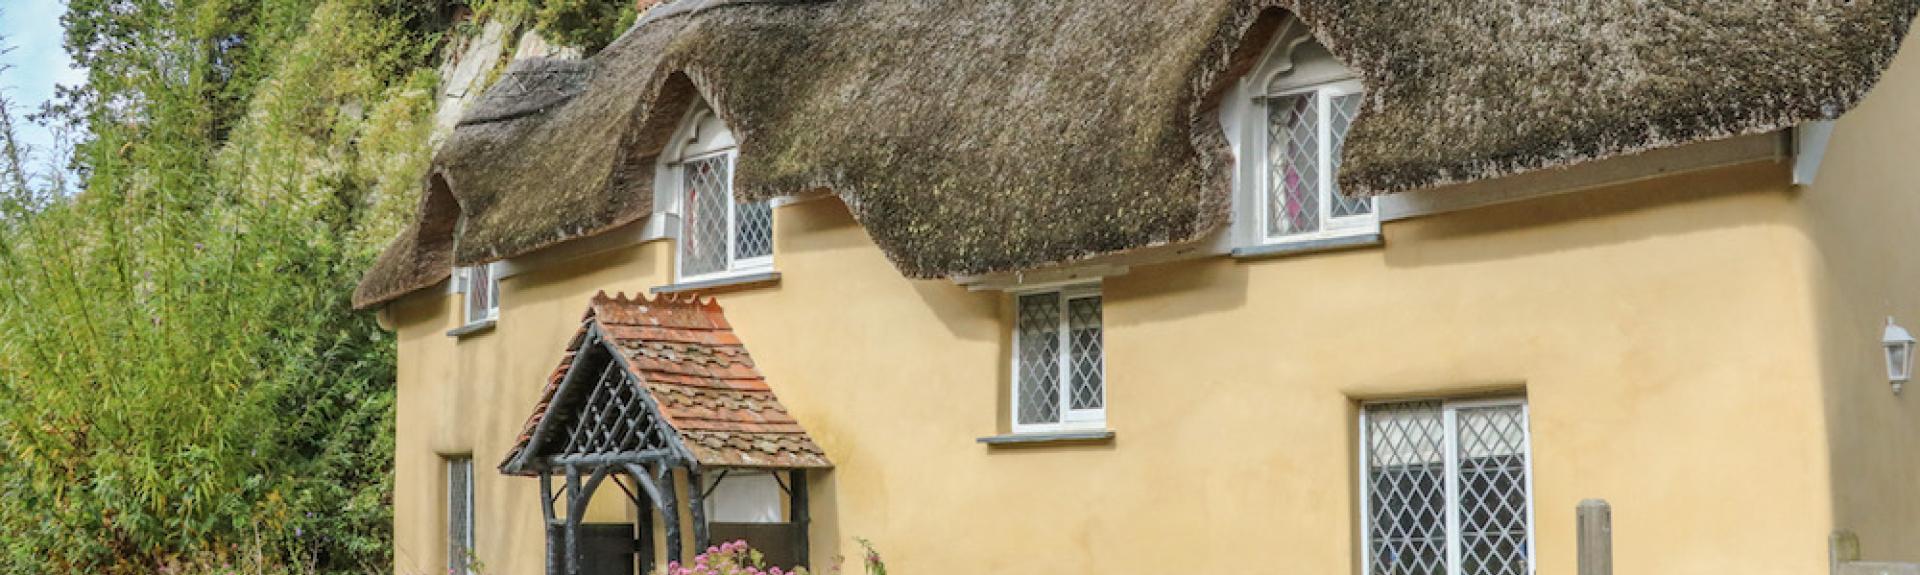 Exterior of a thatched cottage with porch and low stone wall.